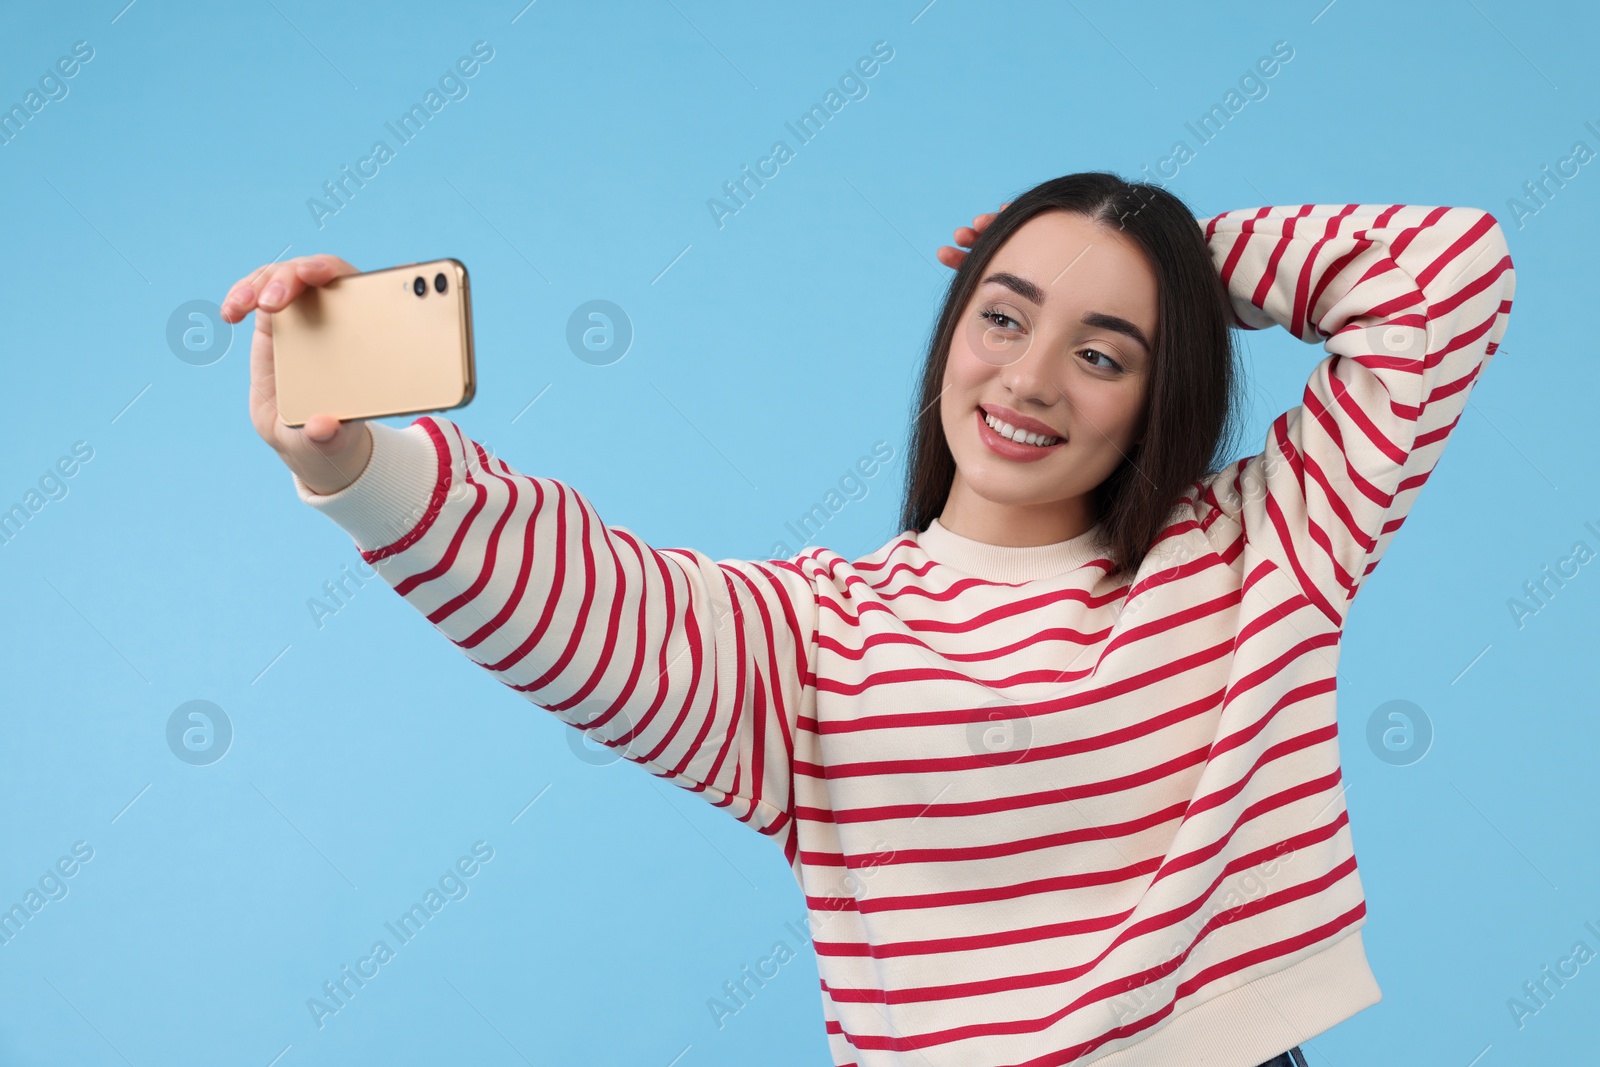 Photo of Smiling young woman taking selfie with smartphone on light blue background